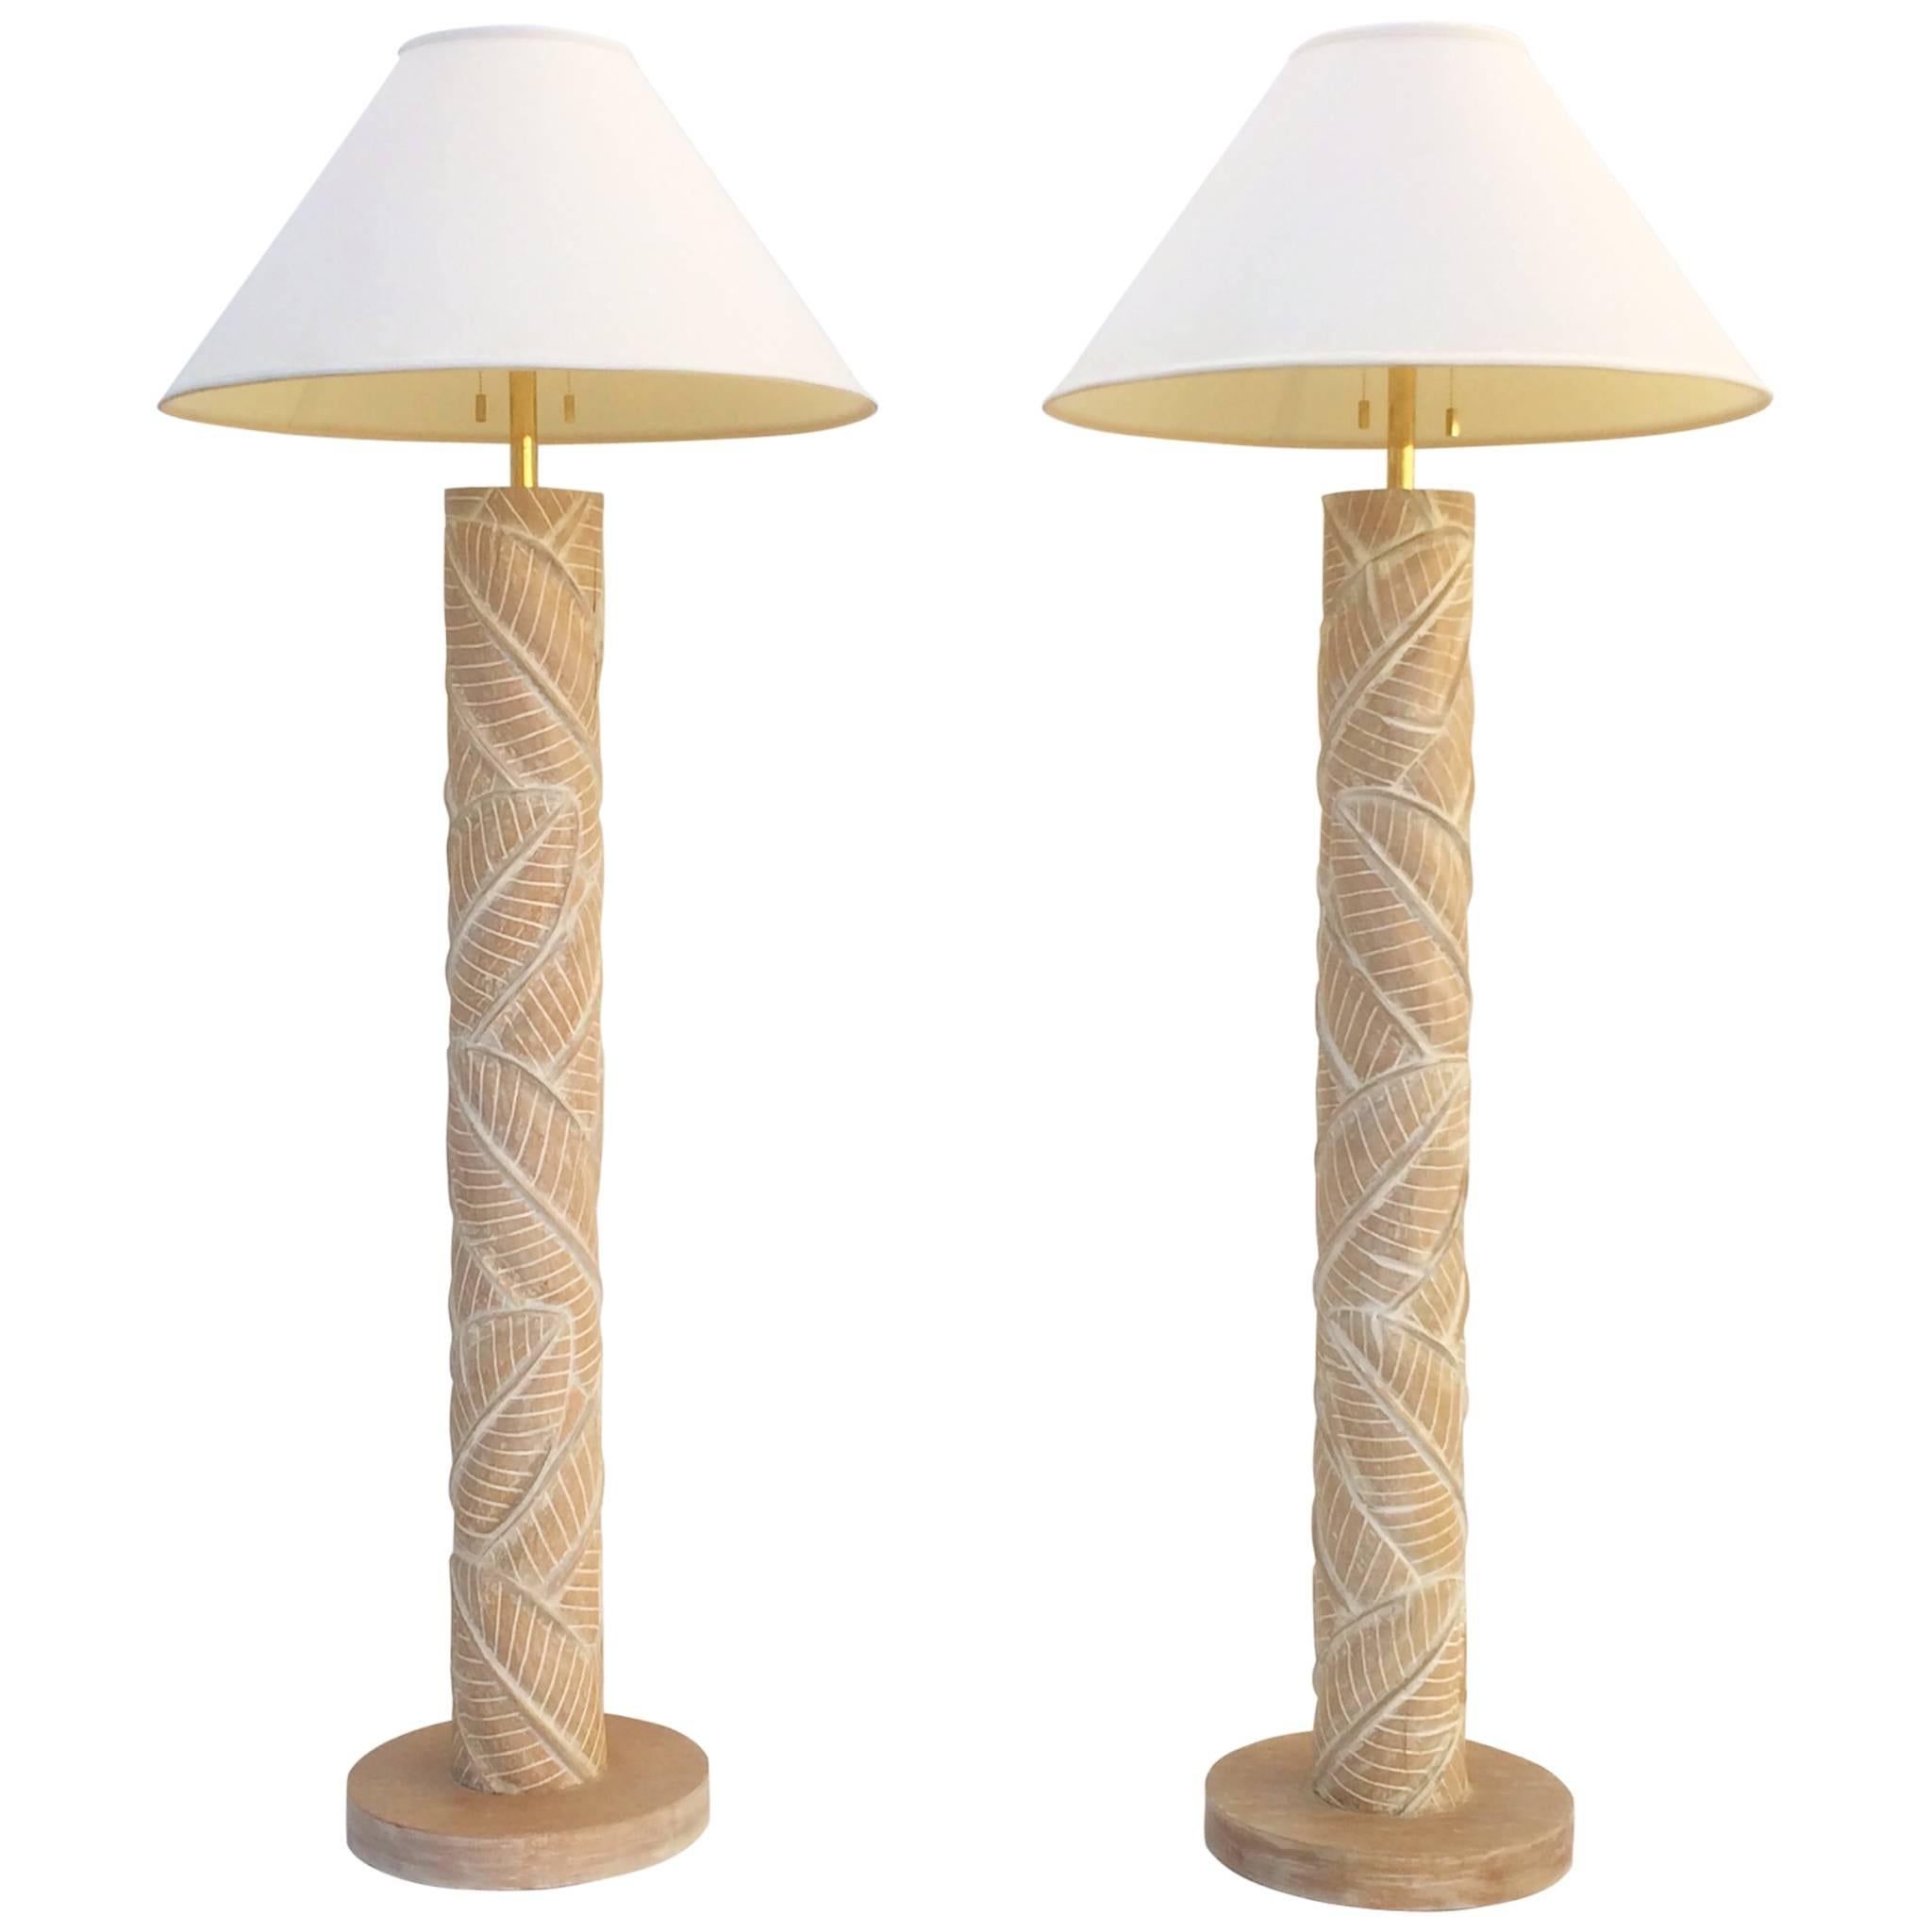 Pair Of Carved Wood Floor Lamps For Sale At 1stdibs For Well Known Carved Pattern Floor Lamps (View 2 of 15)